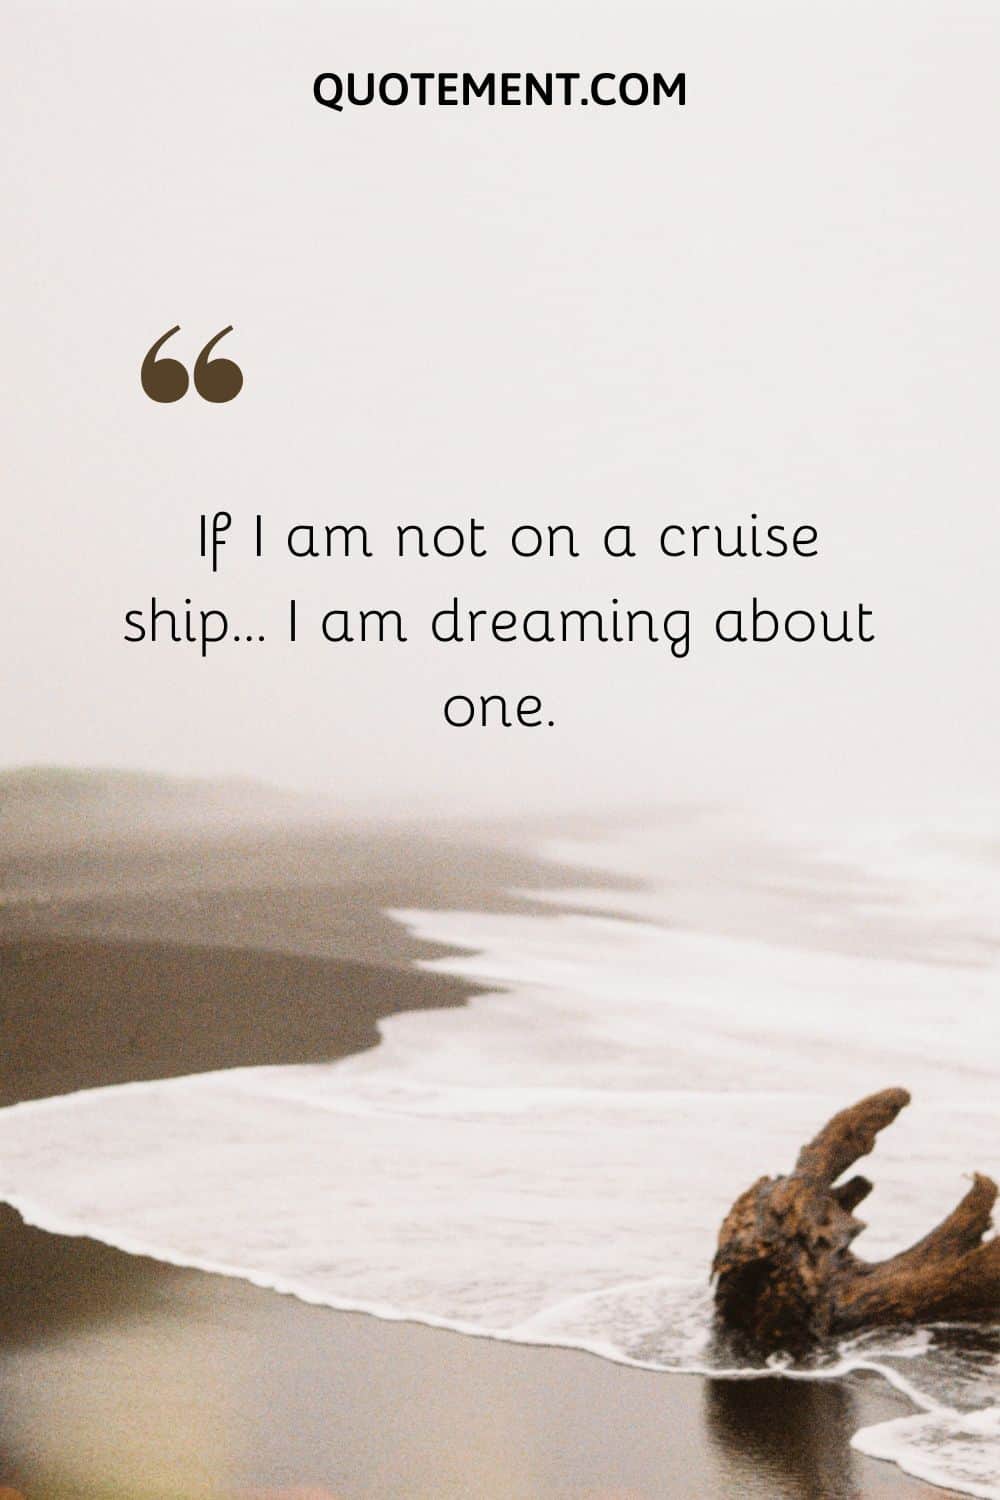 If I am not on a cruise ship… I am dreaming about one.